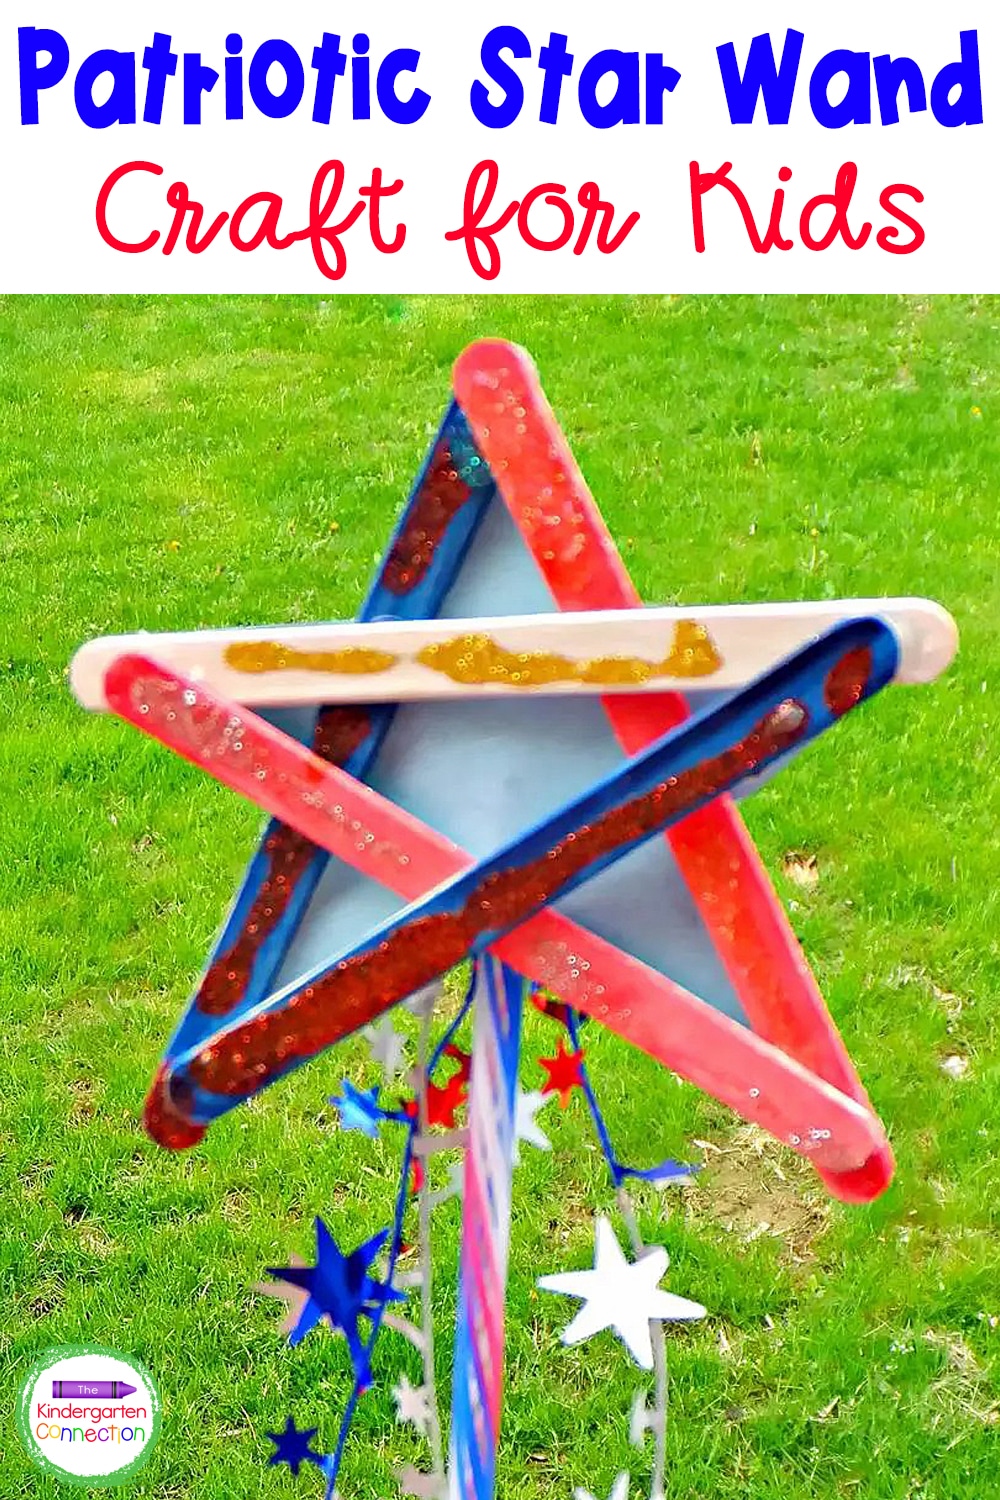 This patriotic star wand craft is the perfect activity for the 4th of July or any patriotic holiday! Your kids will love it!